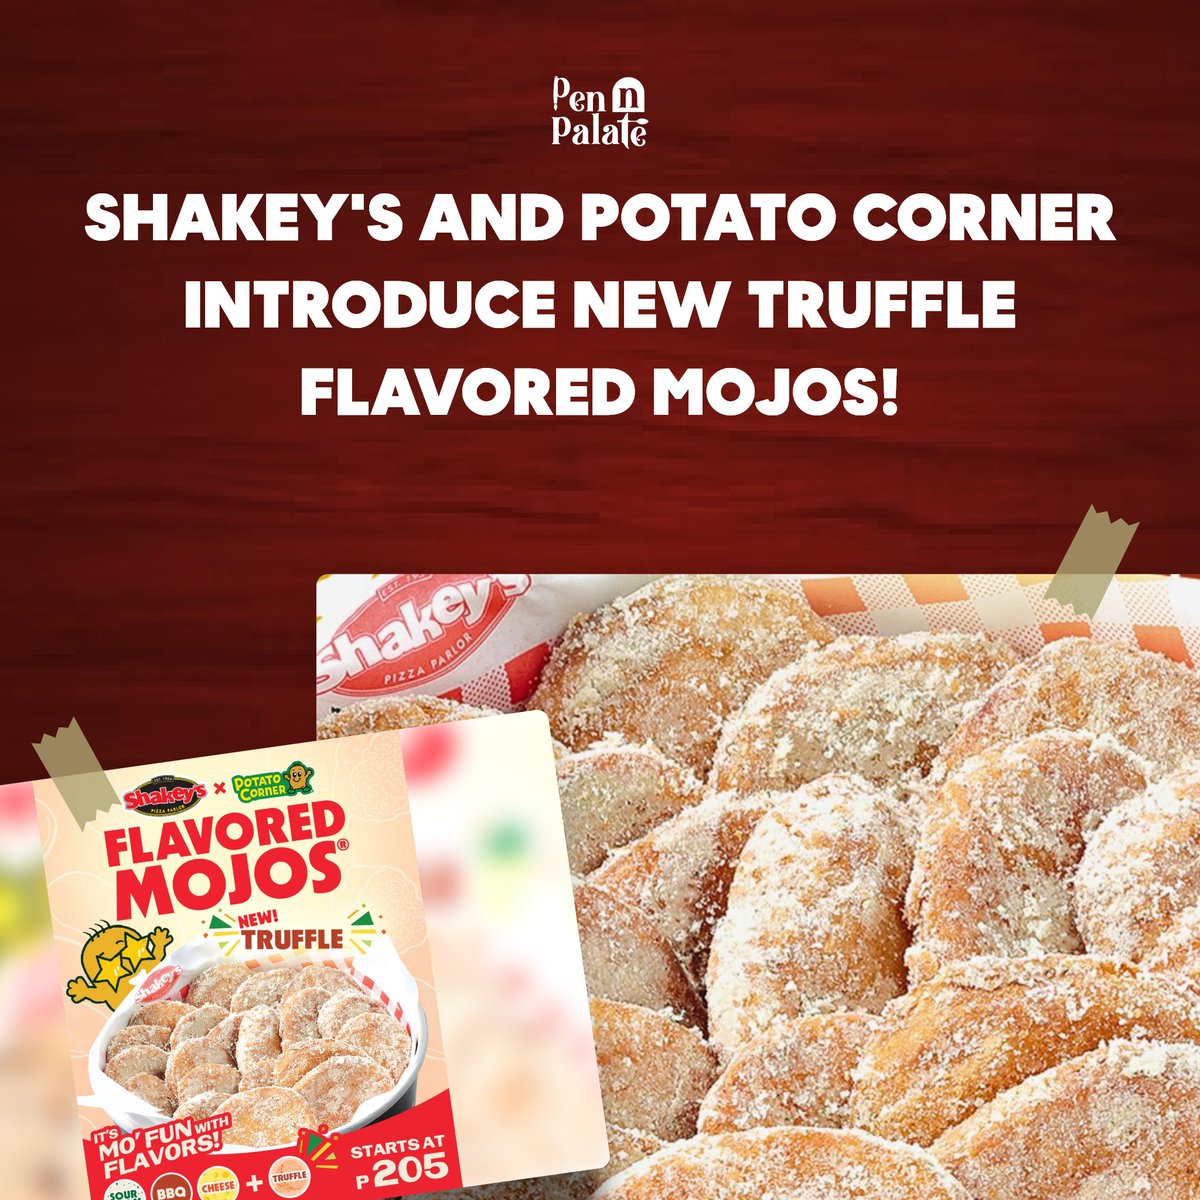 Get ready to elevate your snack game! Shakey's and Potato Corner introduce the all-new Truffle Flavored Mojos! 🍟✨ #TruffleMojos #Shakeys #PotatoCorner #FoodieFinds
Read it here: mnktech.iptime.org:7003/shakeys-and-po…